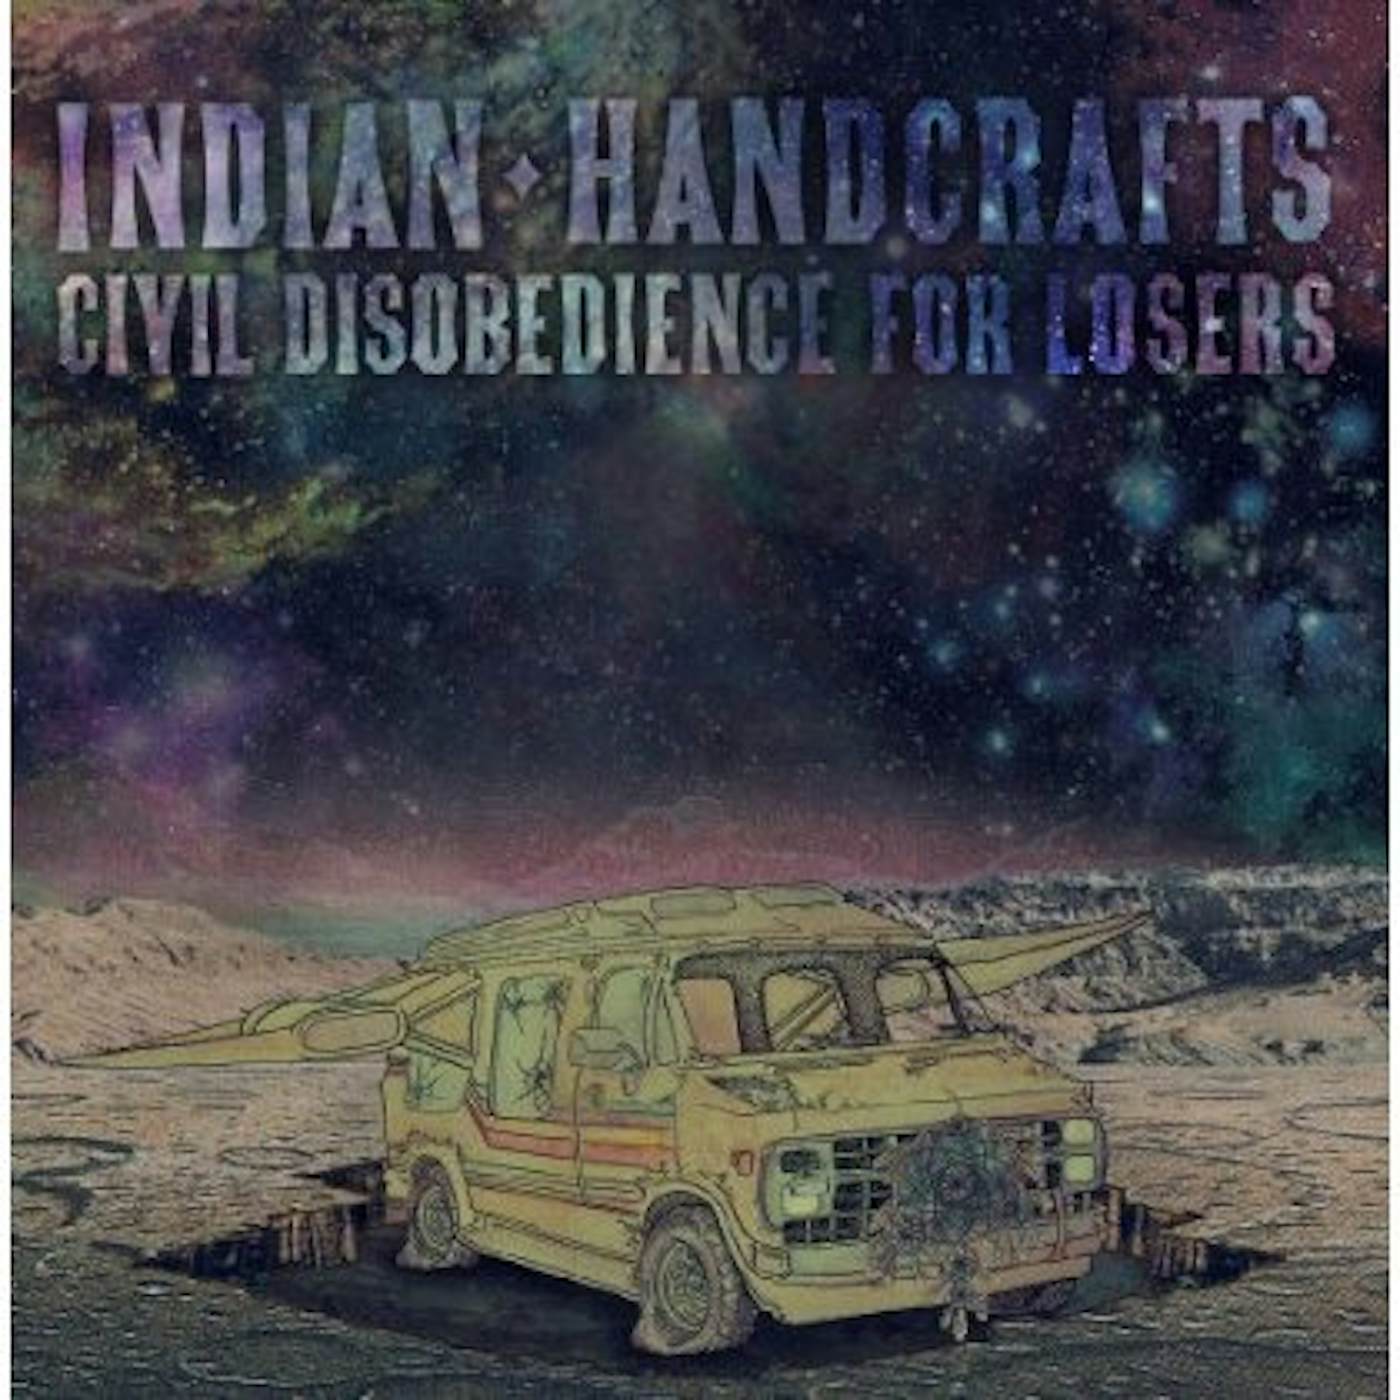 Indian Handcrafts Civil Disobedience for Losers Vinyl Record